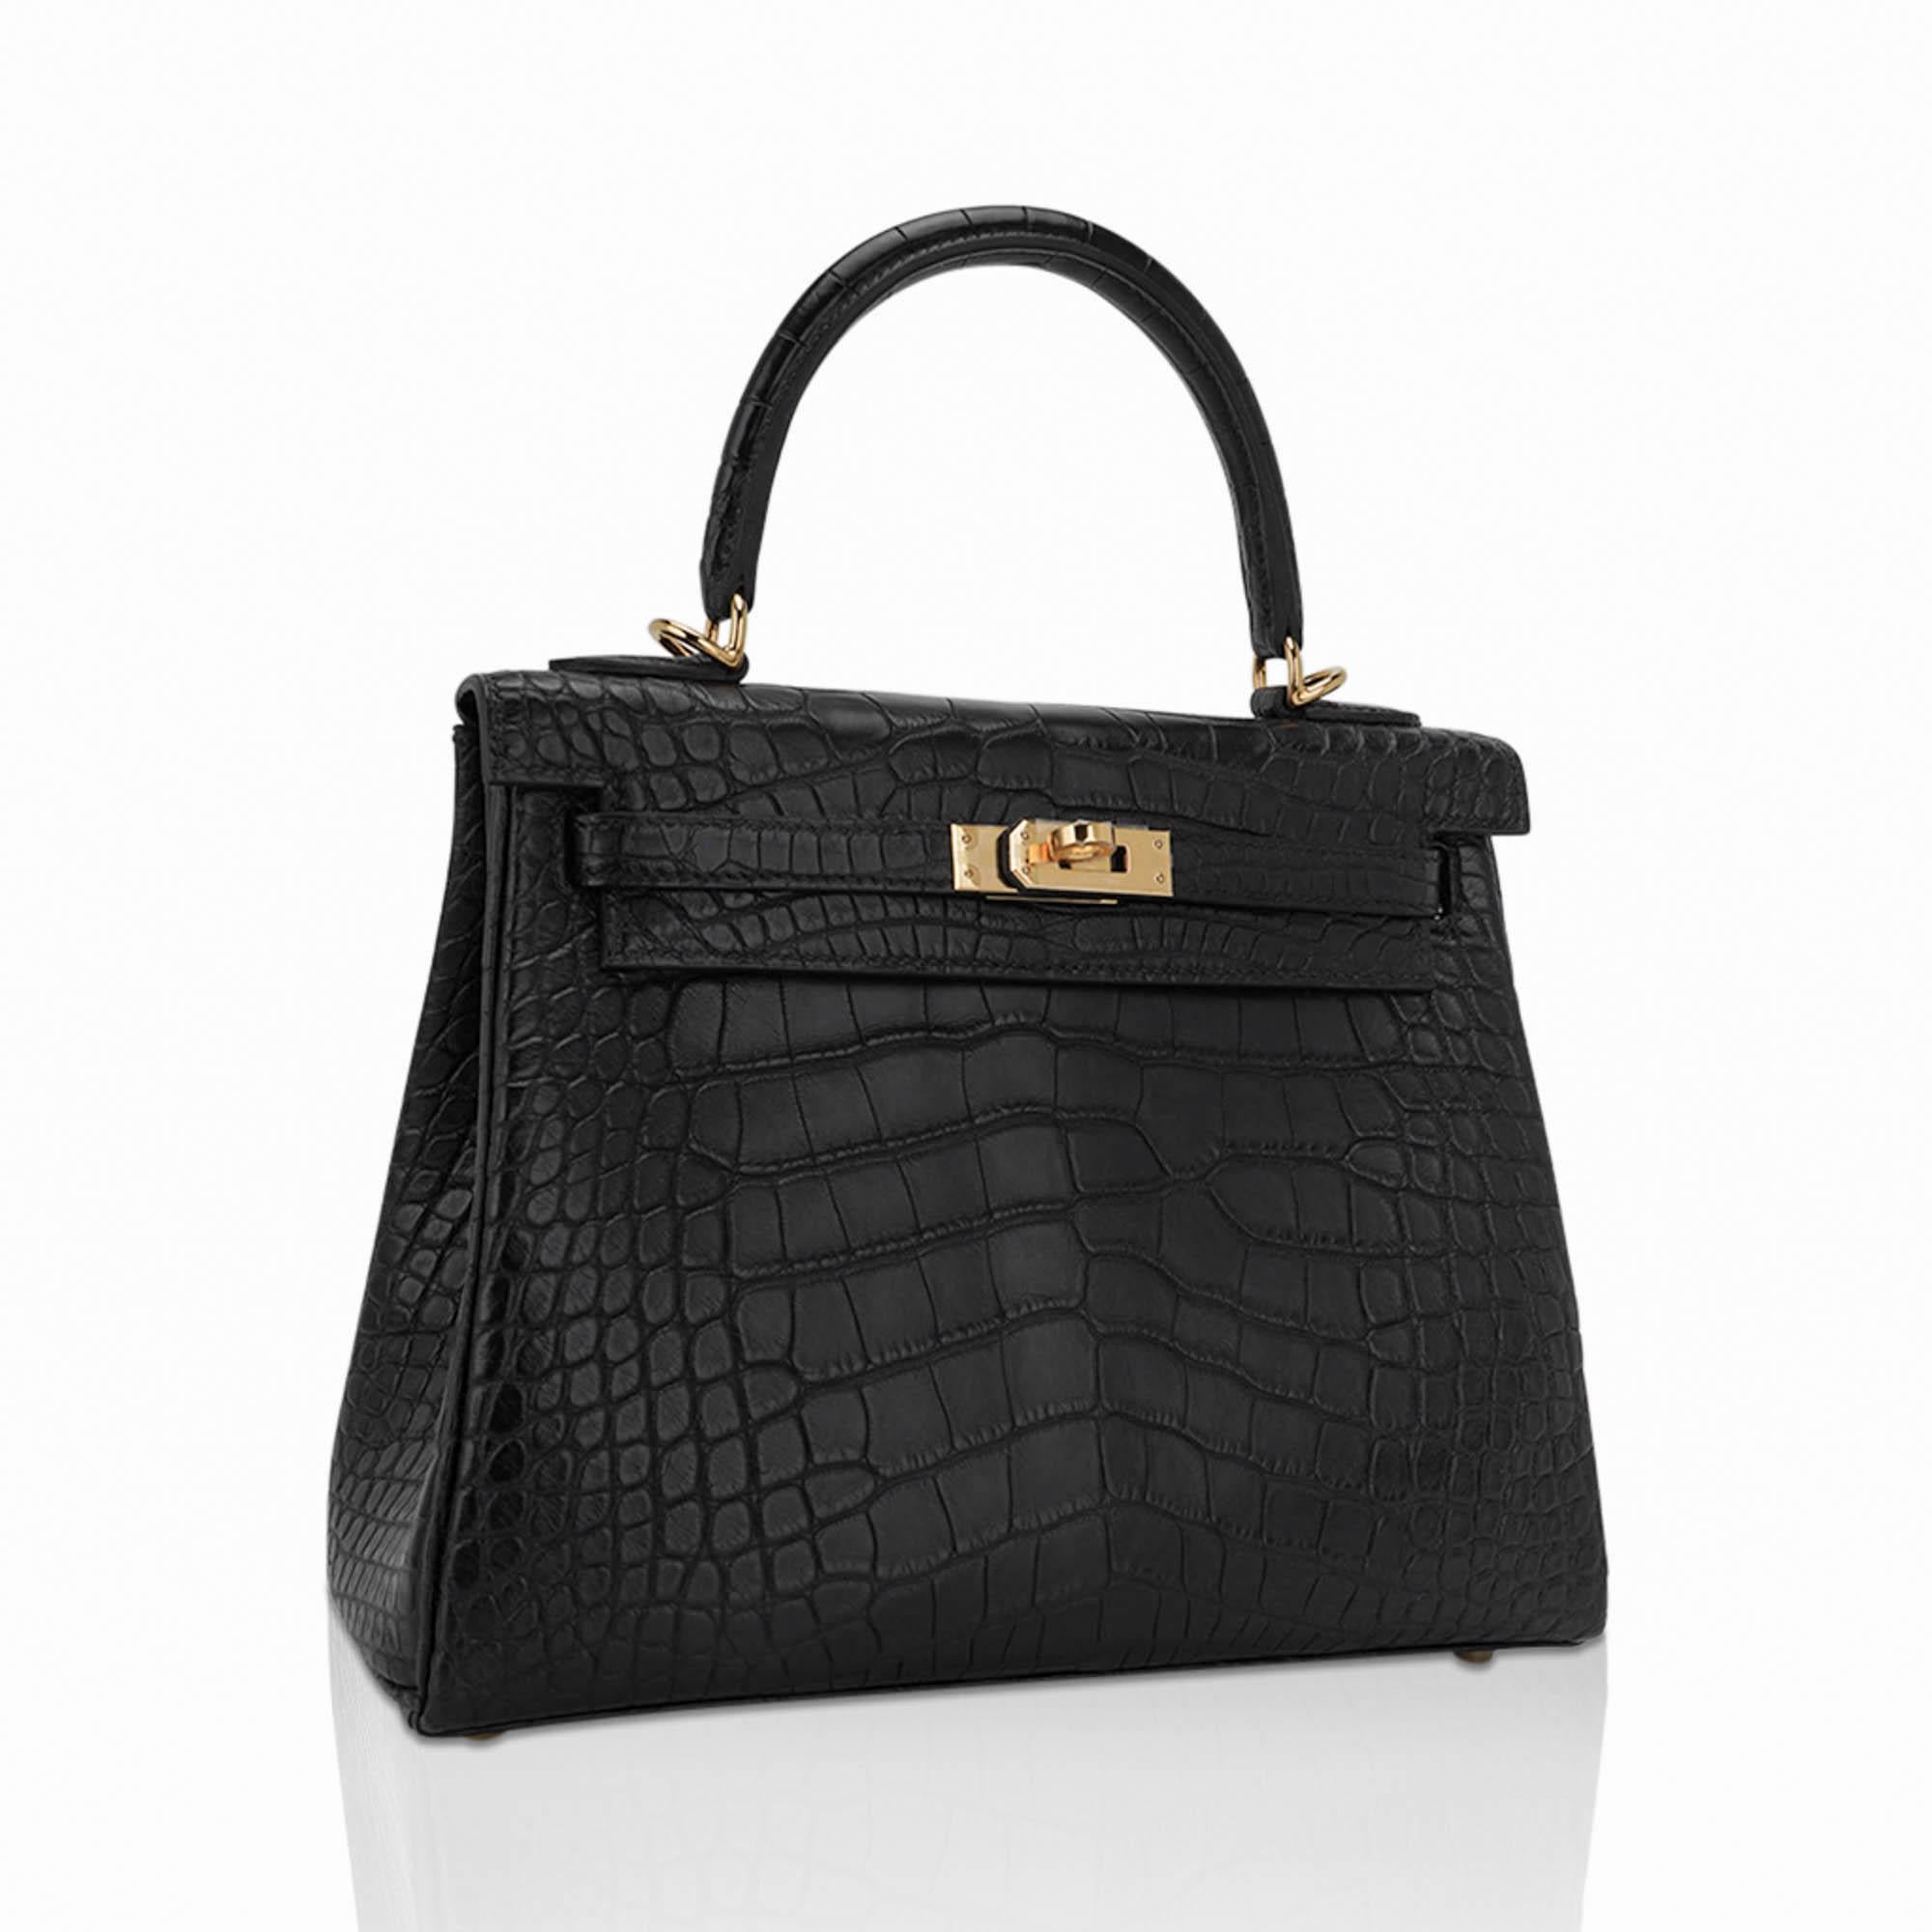 Mightychic offers an Hermes Kelly 25 Retourne bag presented in classic Black Matte Alligator.
Timeless and chic, this gorgeous Kelly bag only grows more beautiful as it ages, showcasing its enduring workmanship and excellent craftsmanship to the